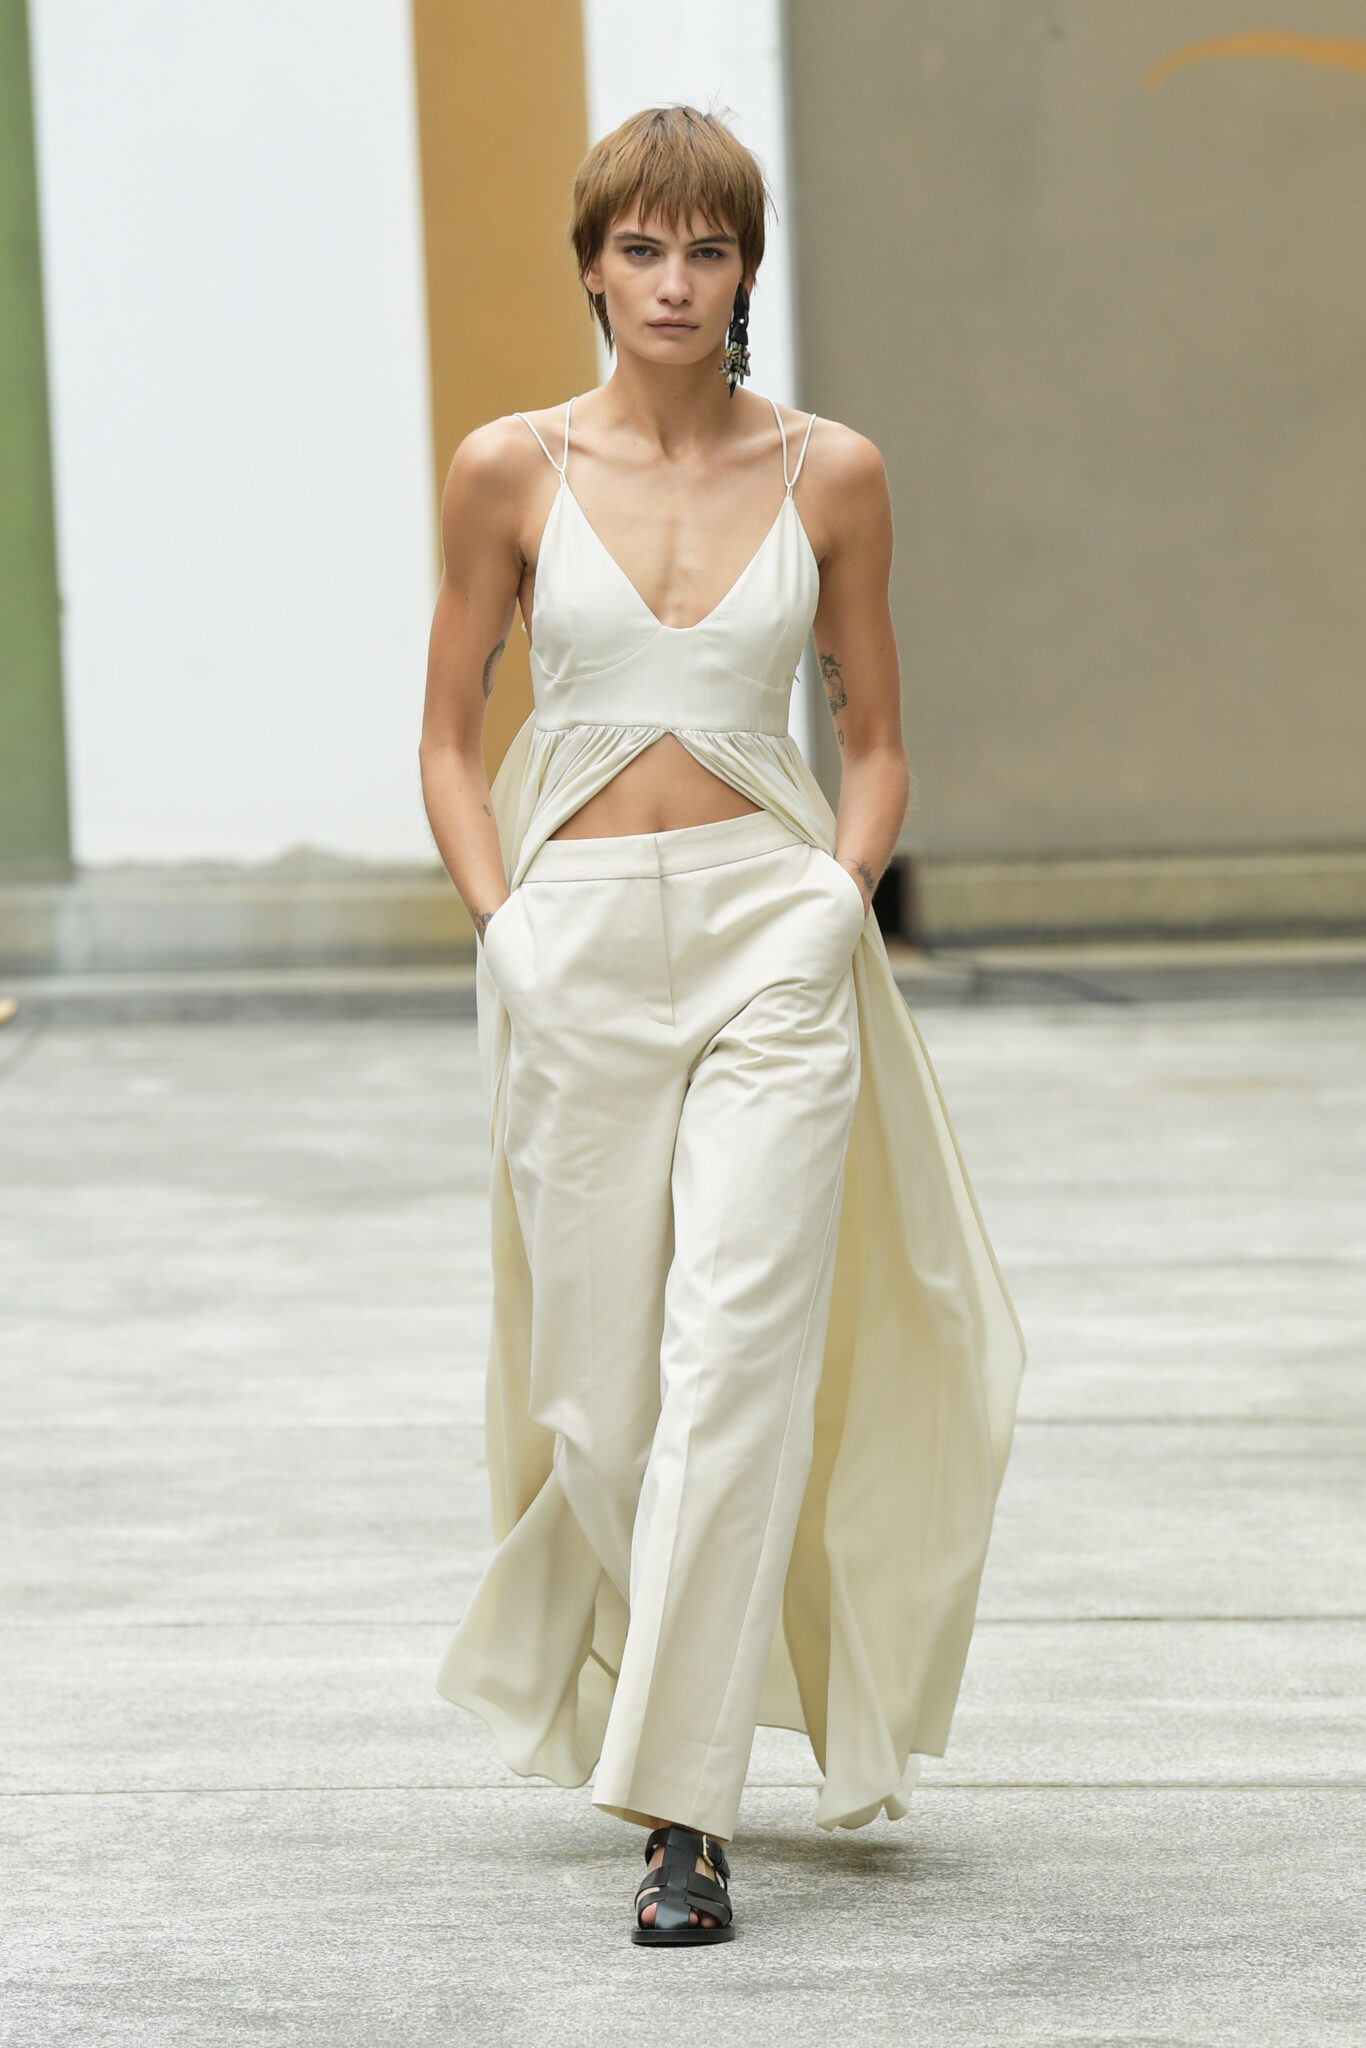 Highlights From Copenhagen Fashion Week SS23 - What You Need To Know ...